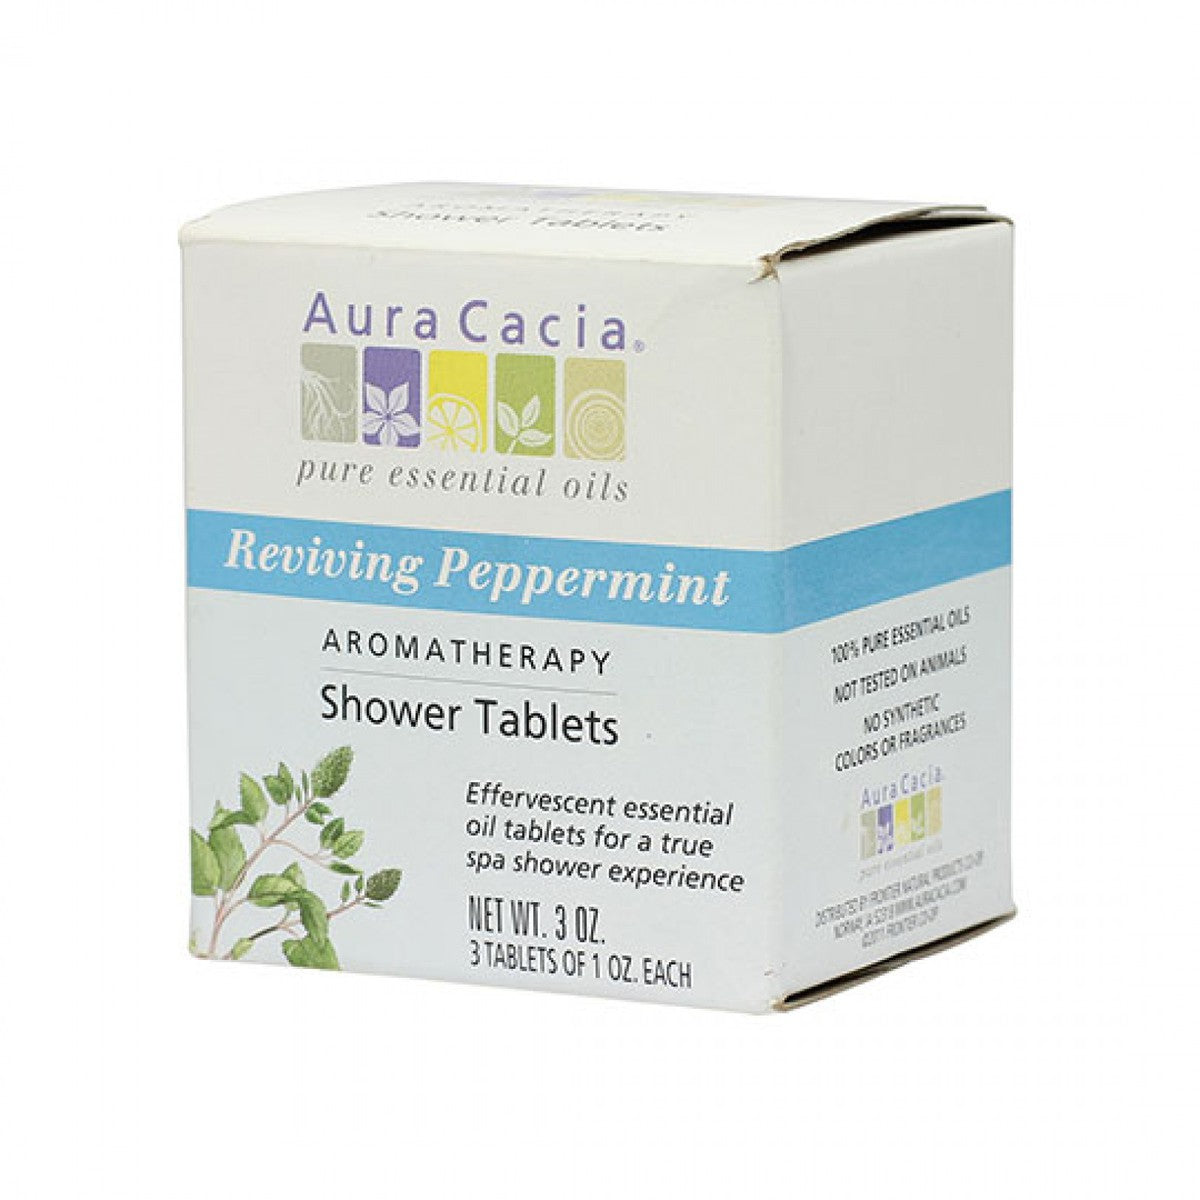 Primary image of Reviving Peppermint Shower Tablets (3 Pack)